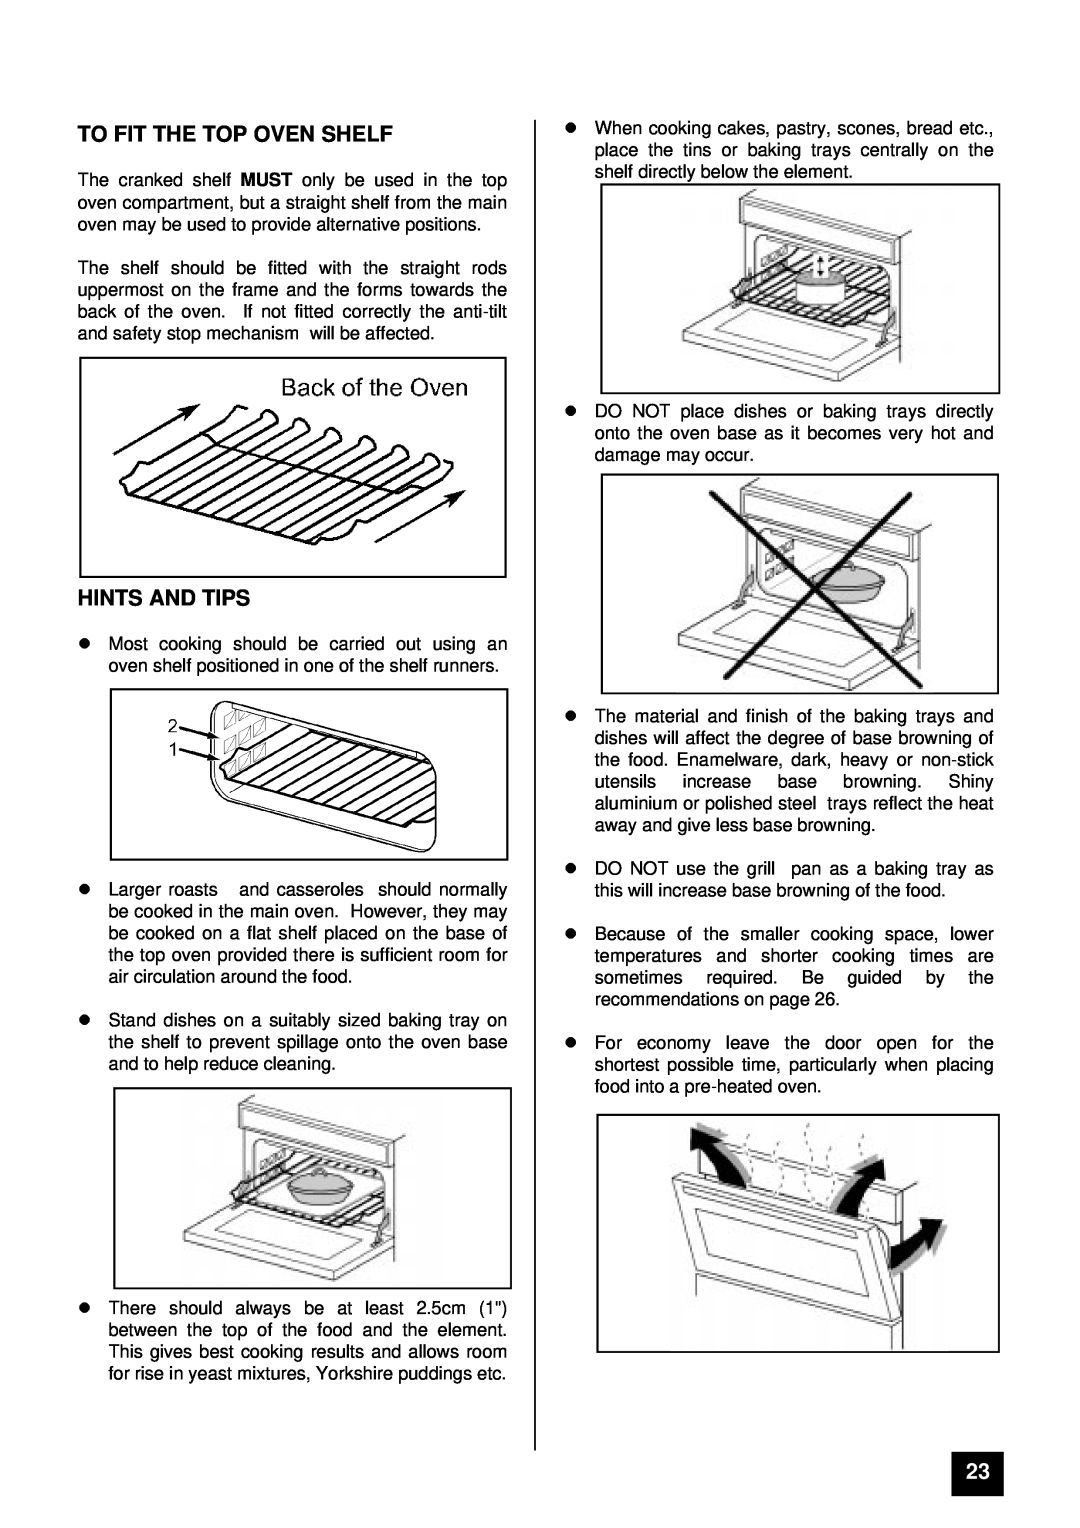 Zanussi ZCE 7600, ZCE 7800 manual To Fit The Top Oven Shelf, lHINTS AND TIPS 